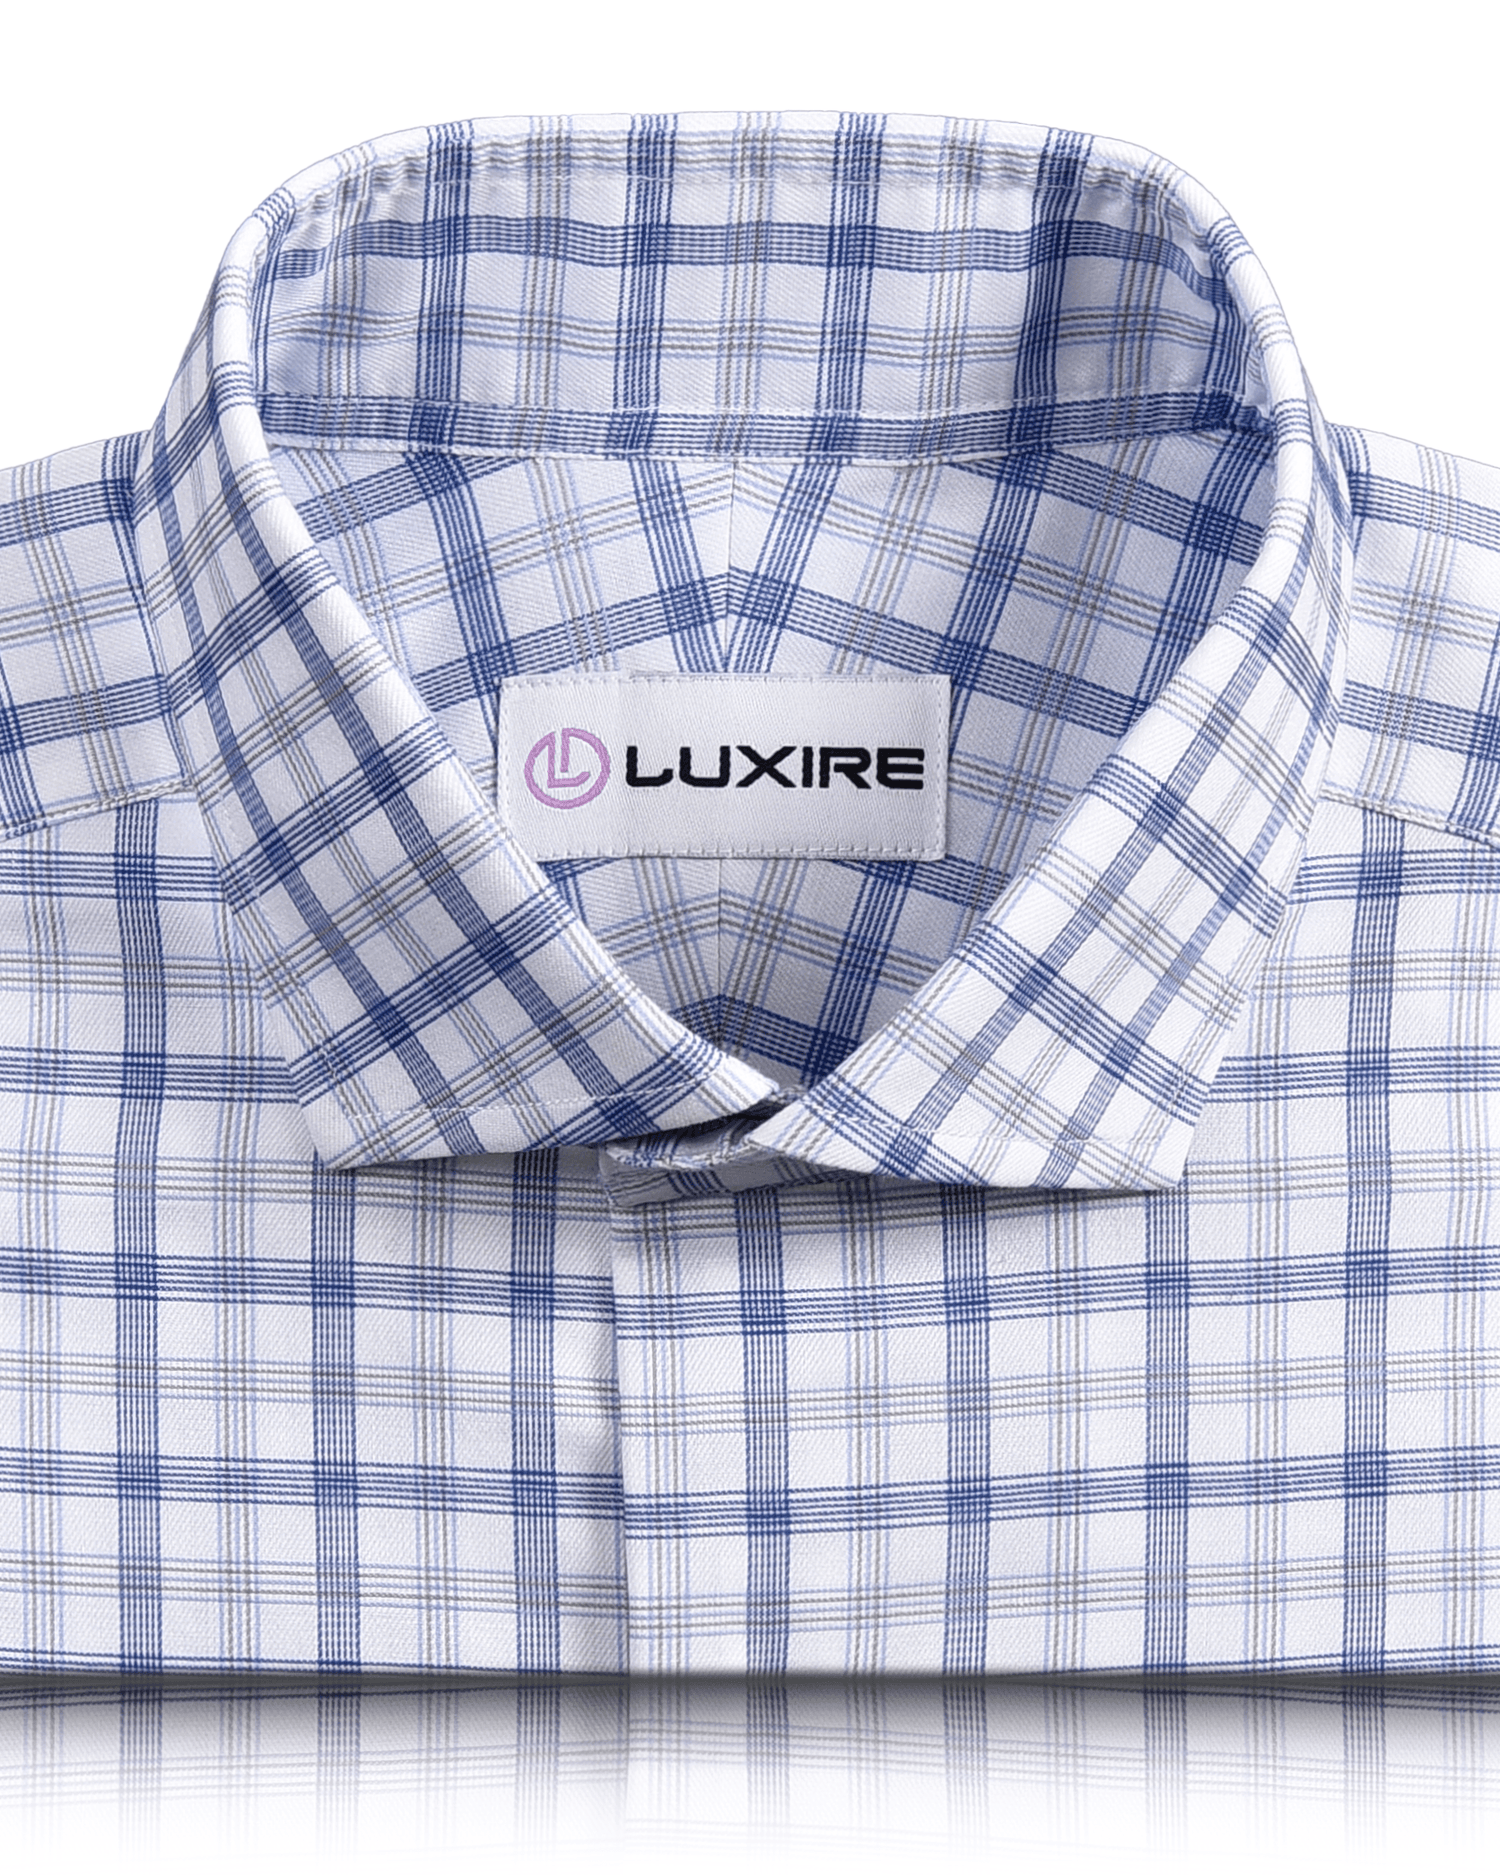 Front close view of custom check shirts for men by Luxire in monti blue grey tattersall